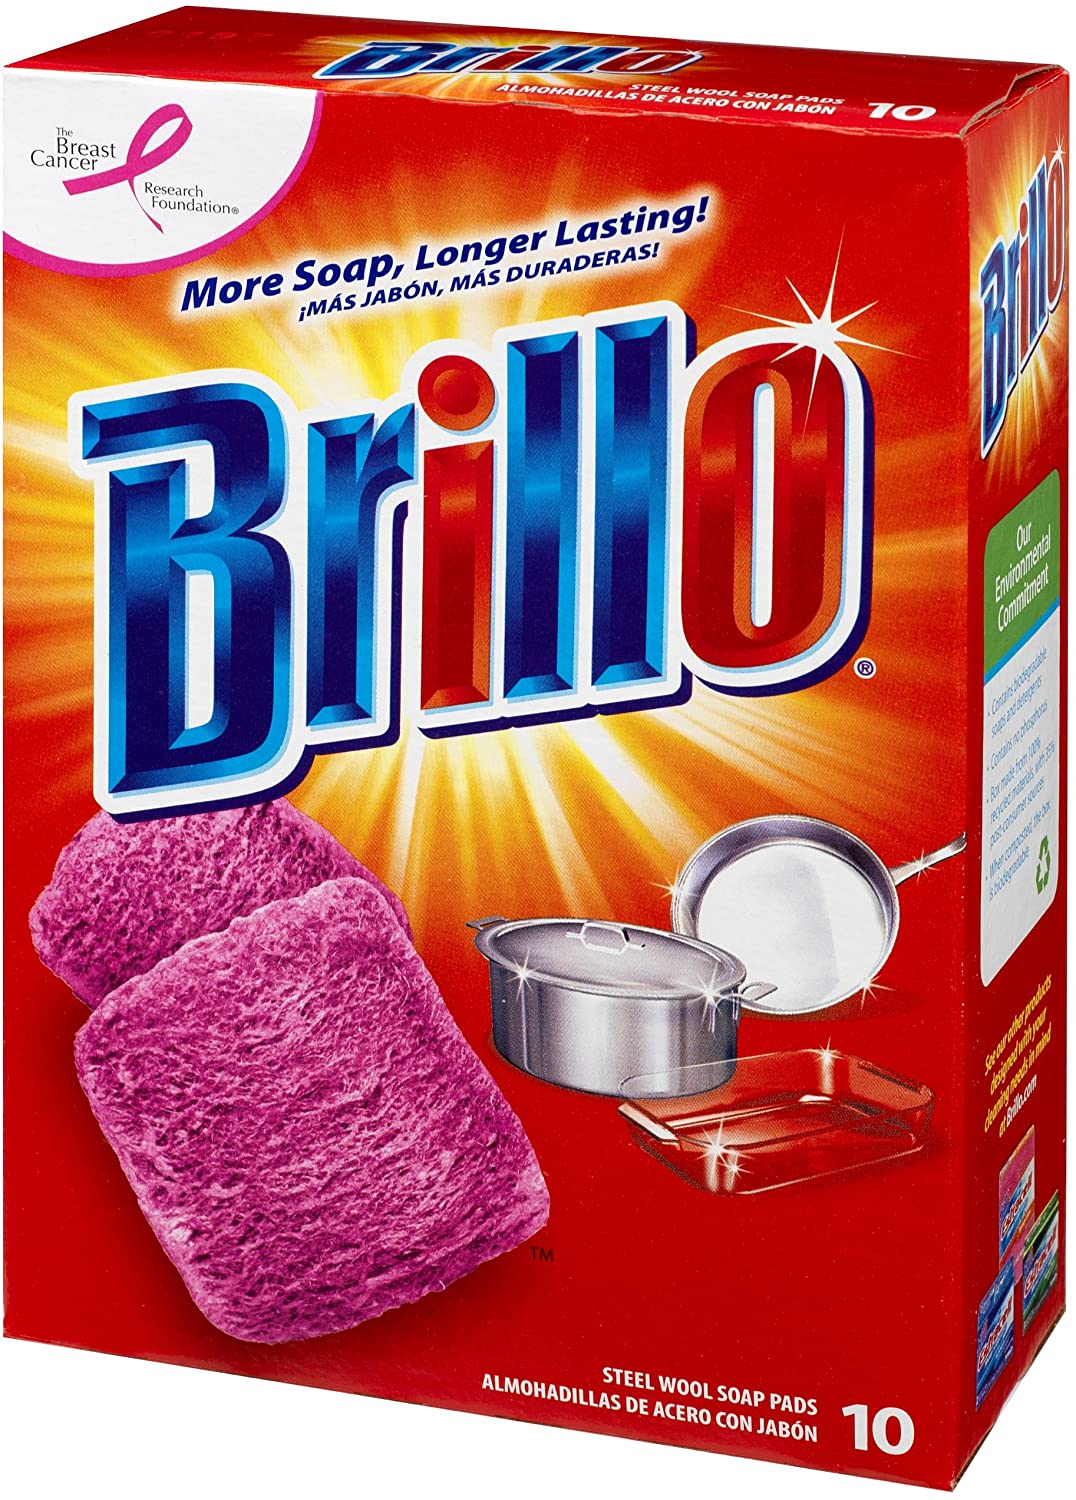 Brillo Steel Wool Soap Pads, Original Scent (Red), 10-Count - $1.88